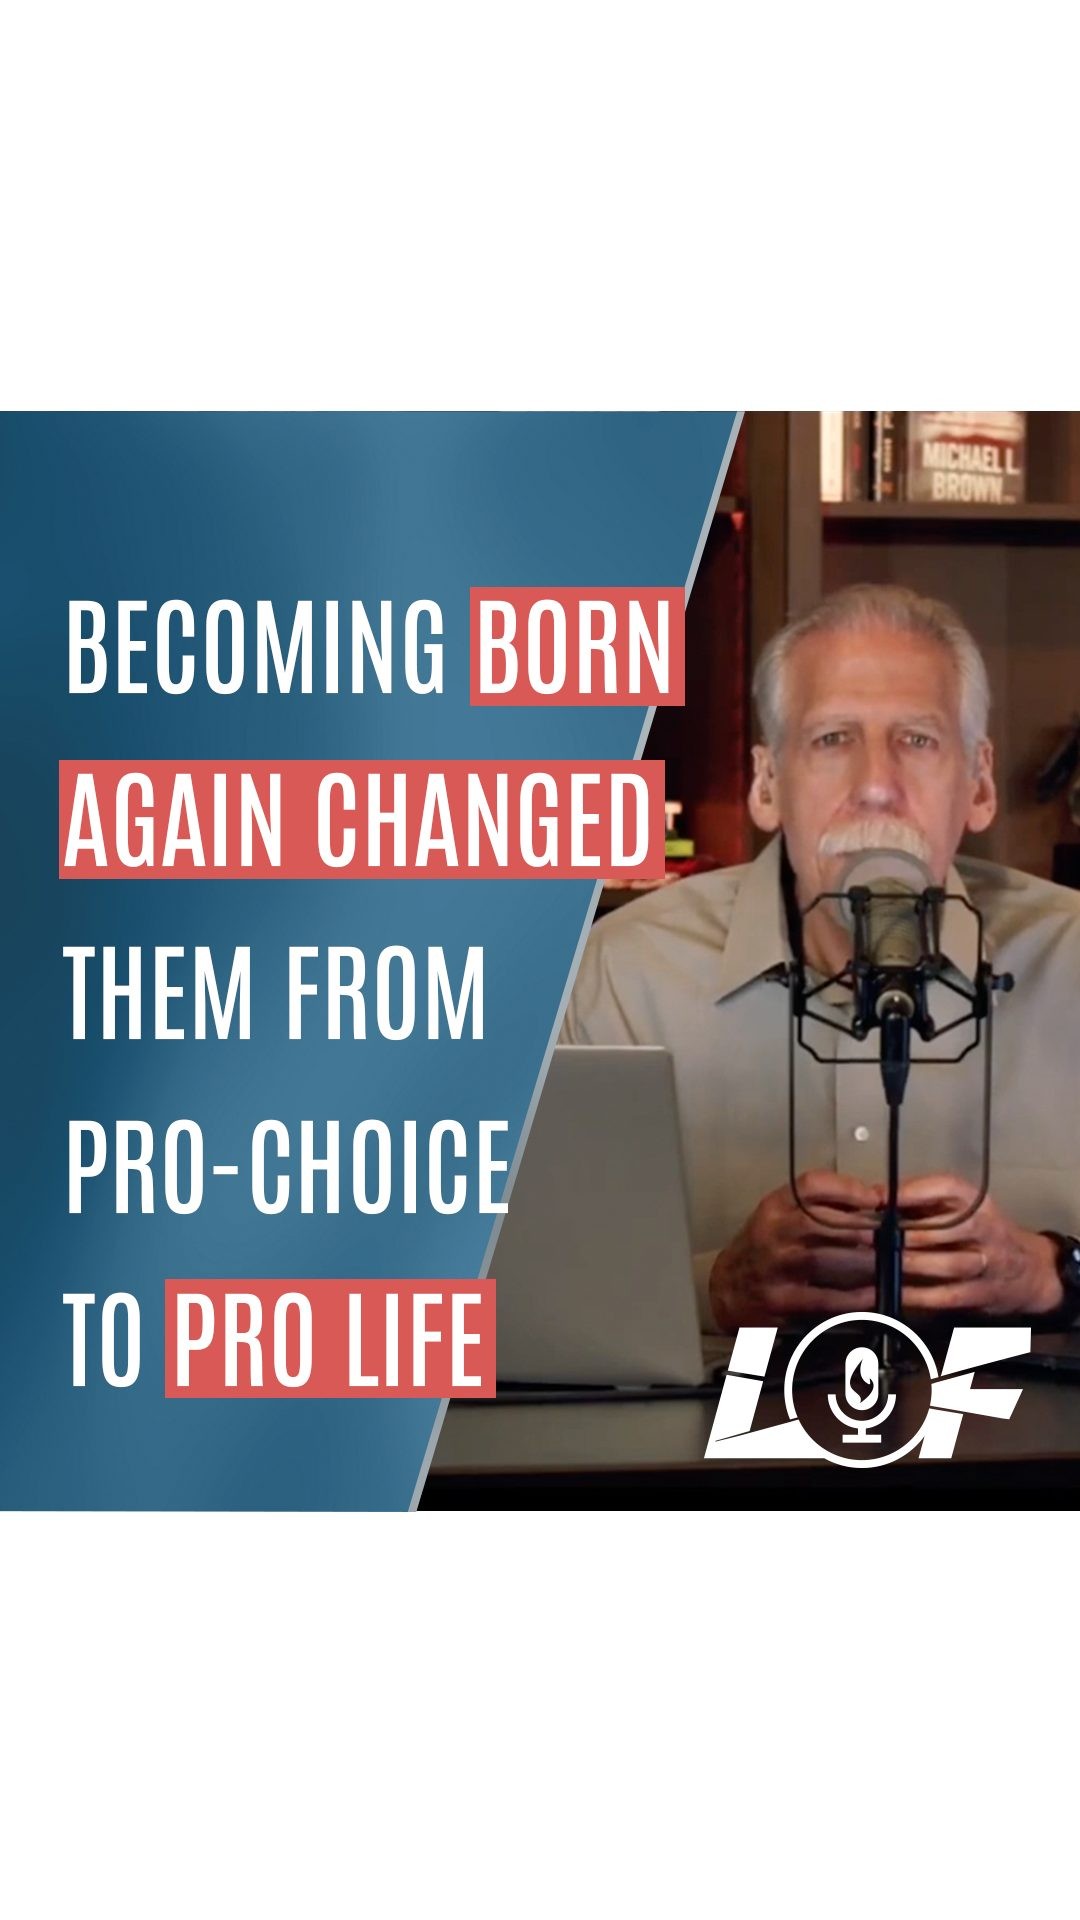 Becoming Born Again Changed Them from Pro-Choice To Pro Life
What powerful stories! Check out these two callers, first a woman and then a man, who instantly went from pro-choice to pro-life the moment they were born again. LINK IN BIO
#askdrbrown #prolife #prochoice #abortion